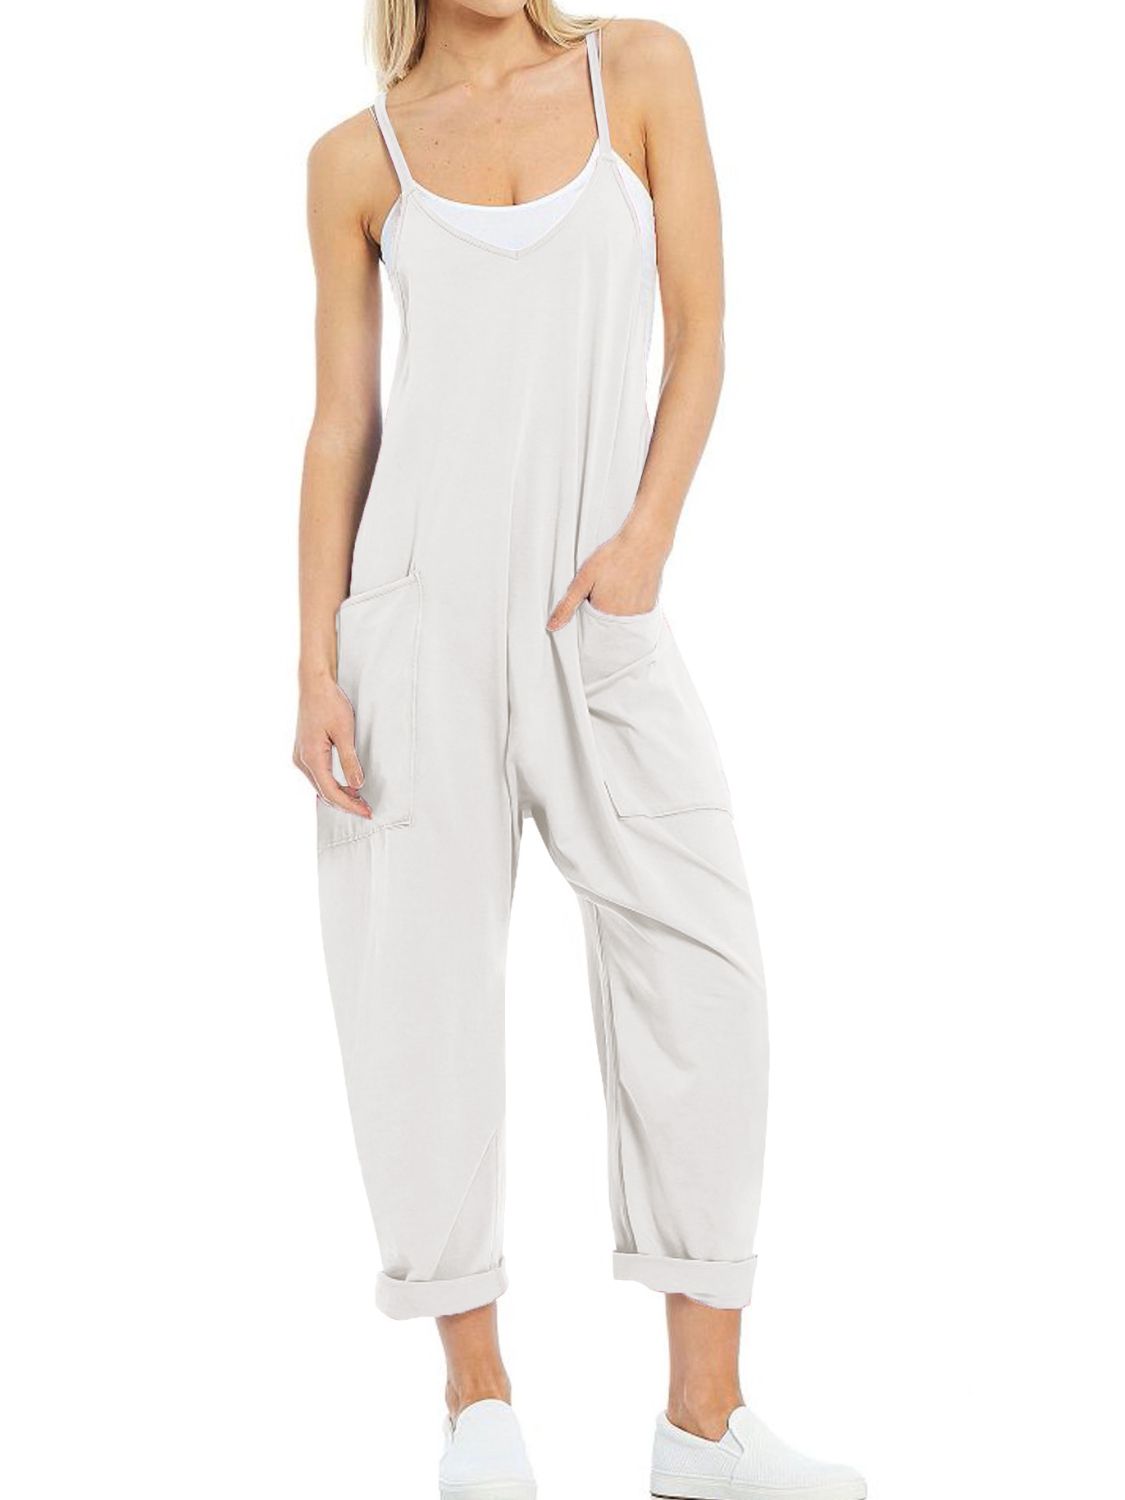 Spaghetti Strap Jumpsuit with Pockets [click for additional options]